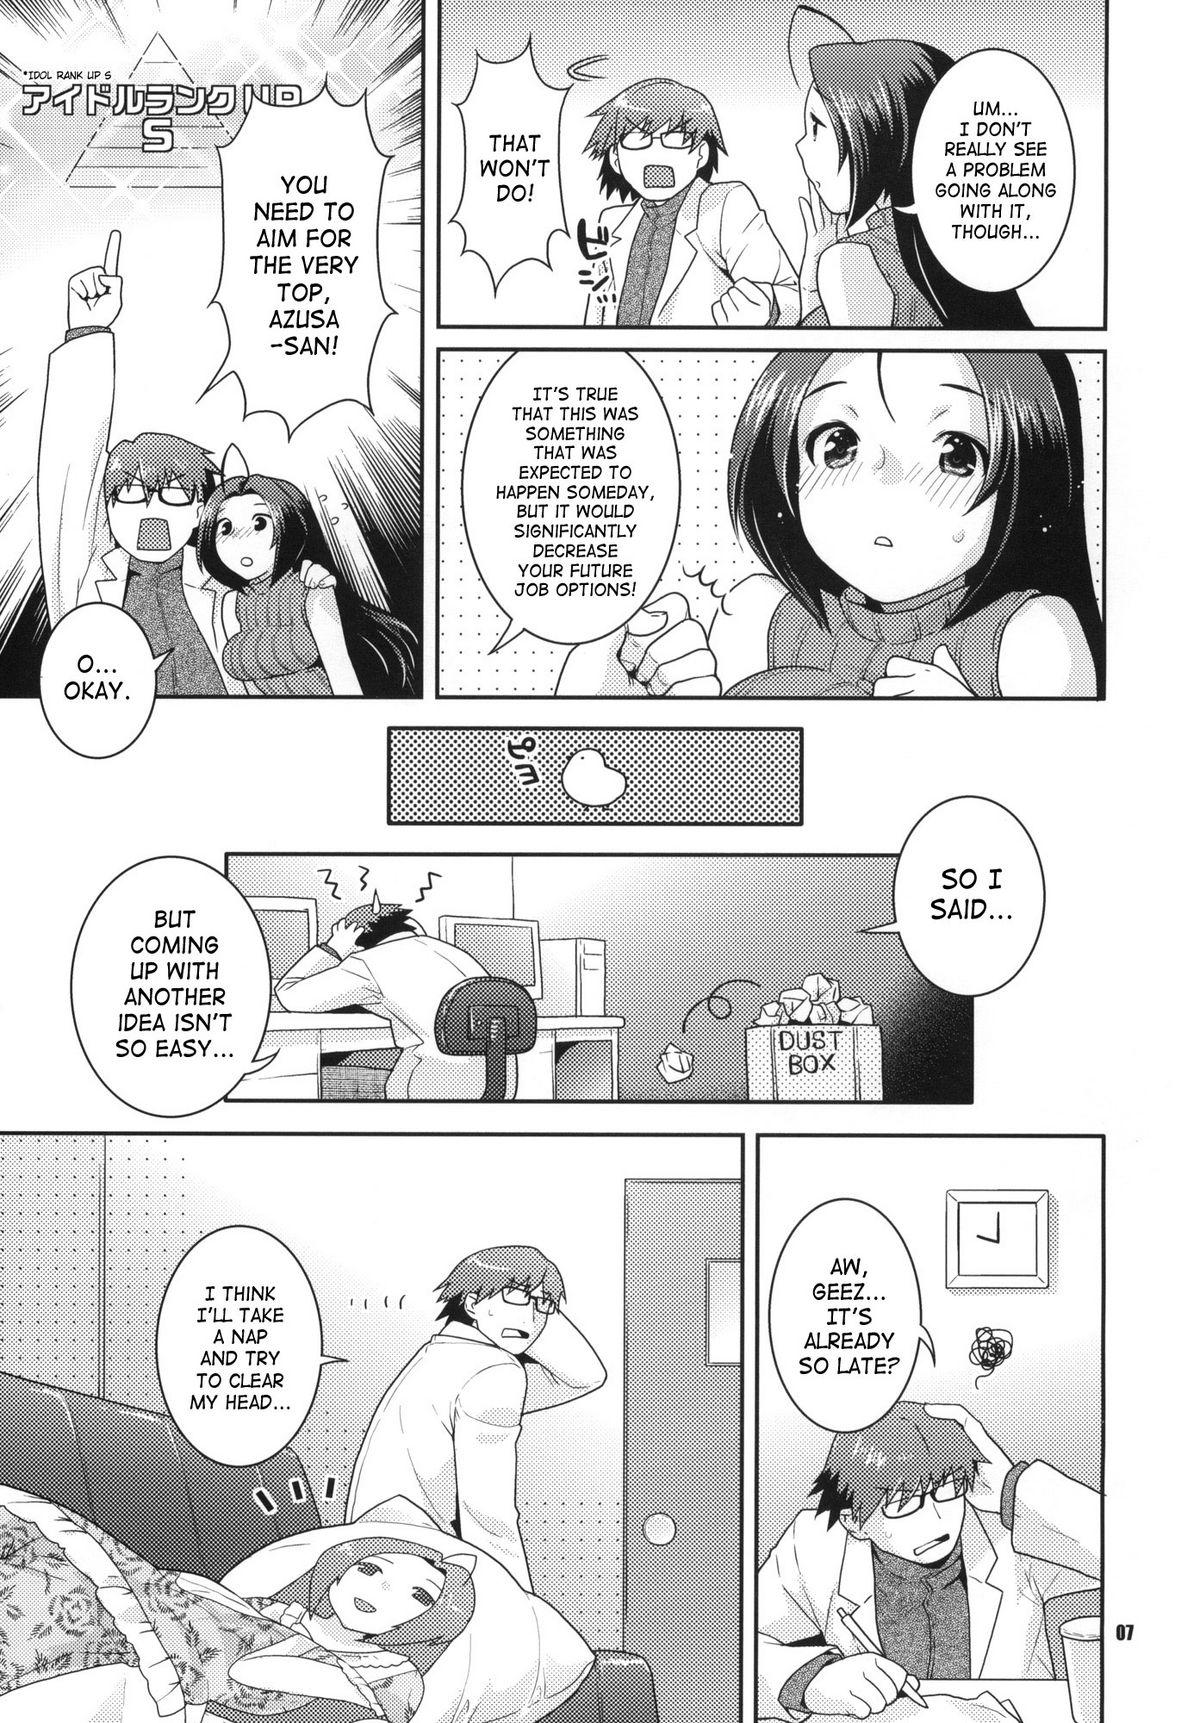 Youth Porn Juicy Pillow Talk - The idolmaster Bizarre - Page 6